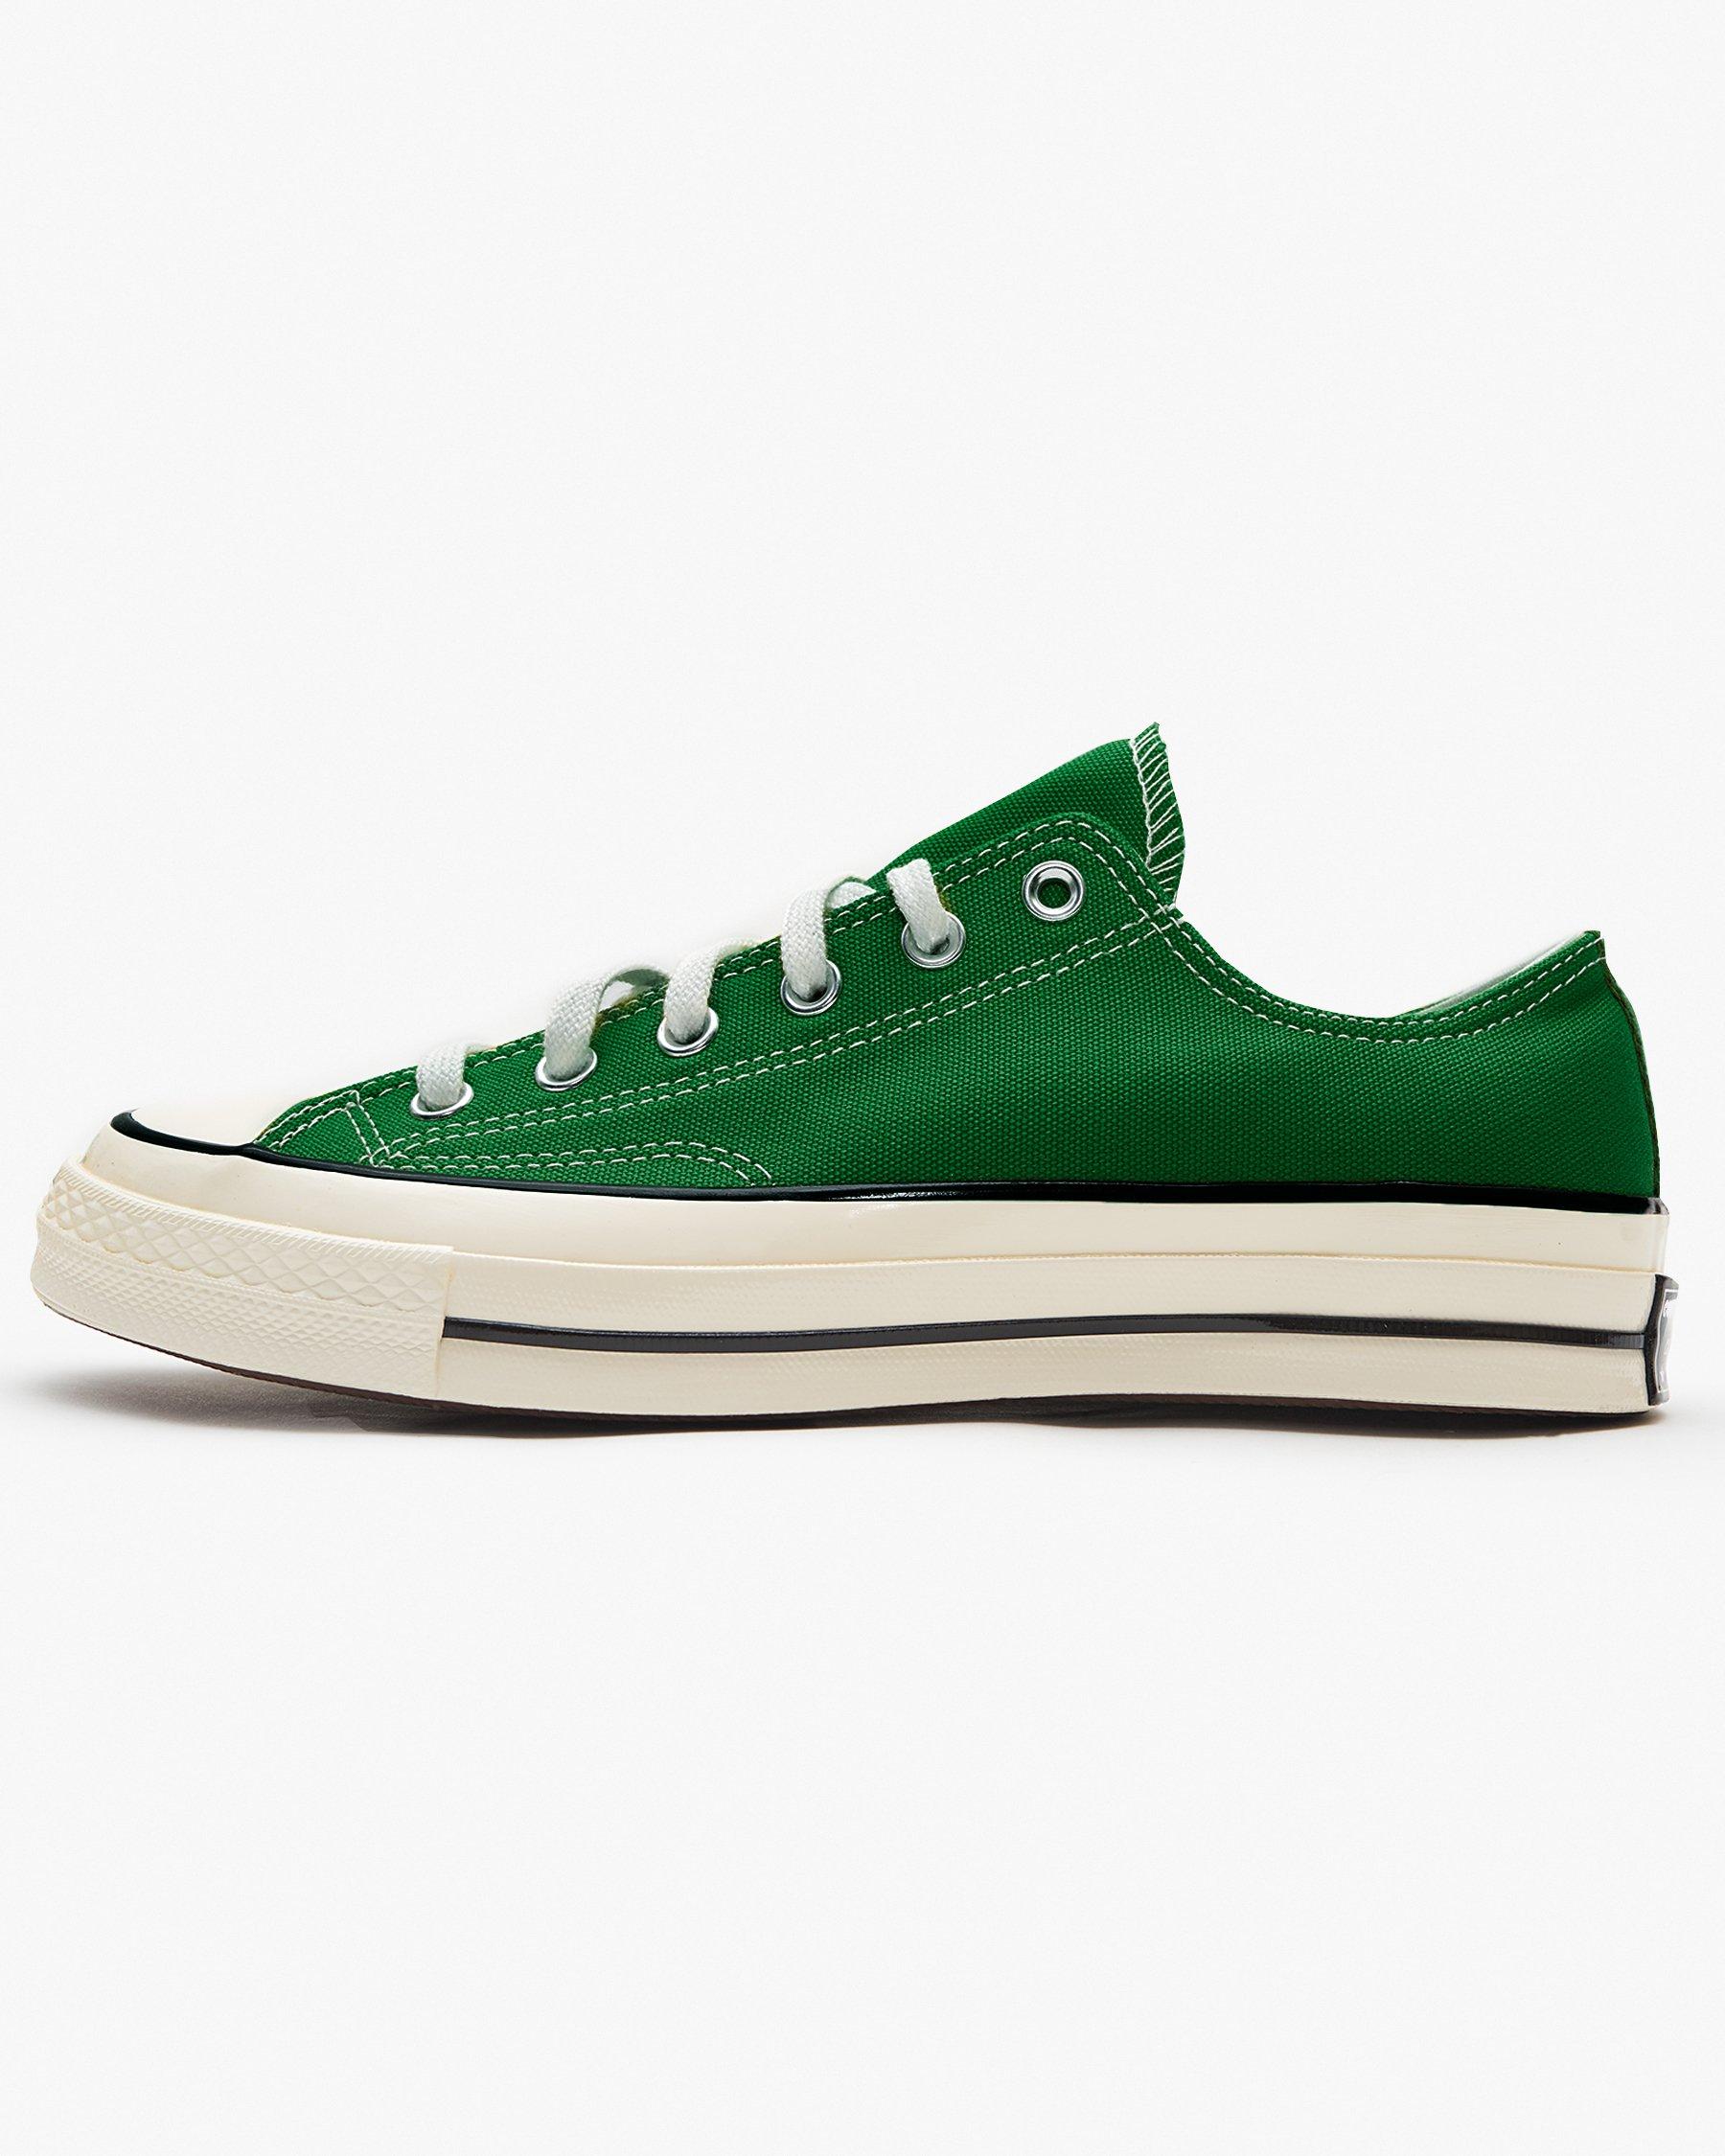 Converse Synthetic Chuck 70 Ox in Green for Men - Save 74% - Lyst